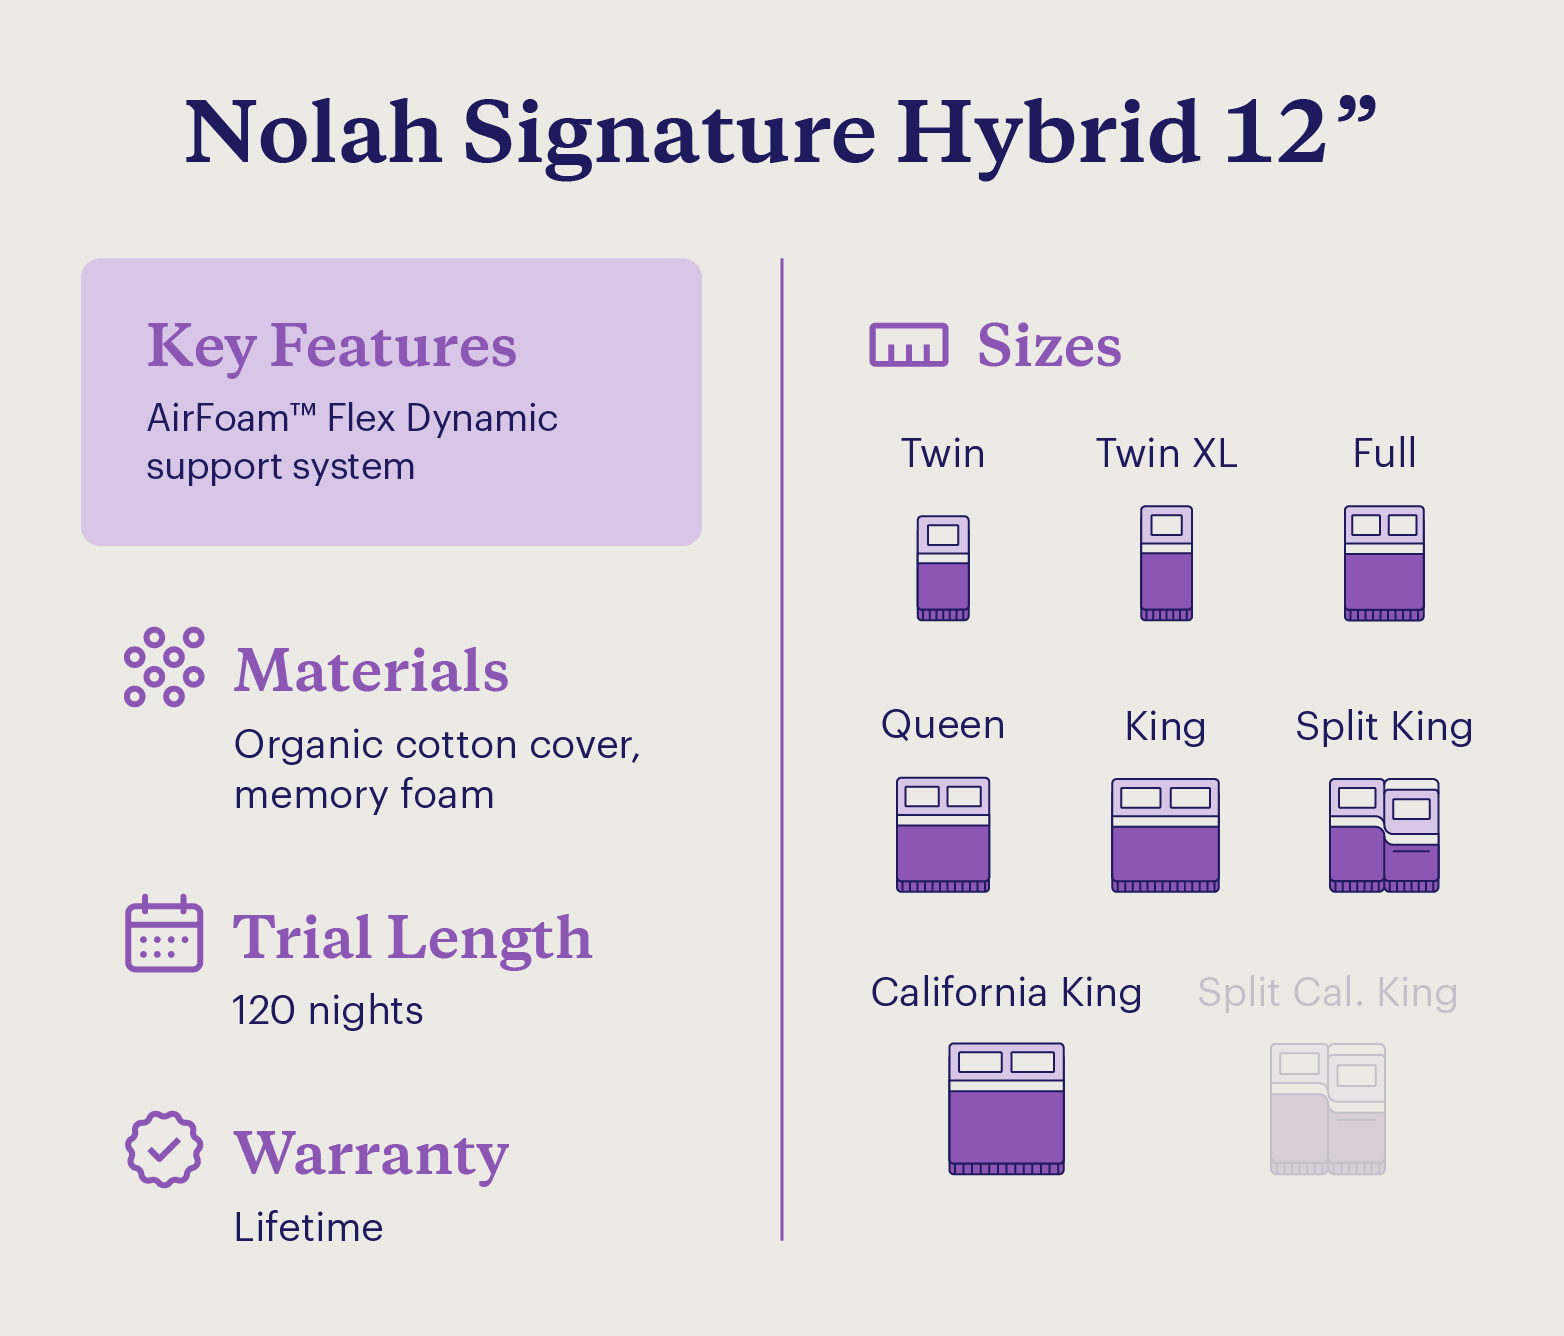 A graphic shows the key features and details of the Nolah Signature Hybrid 12” mattress.